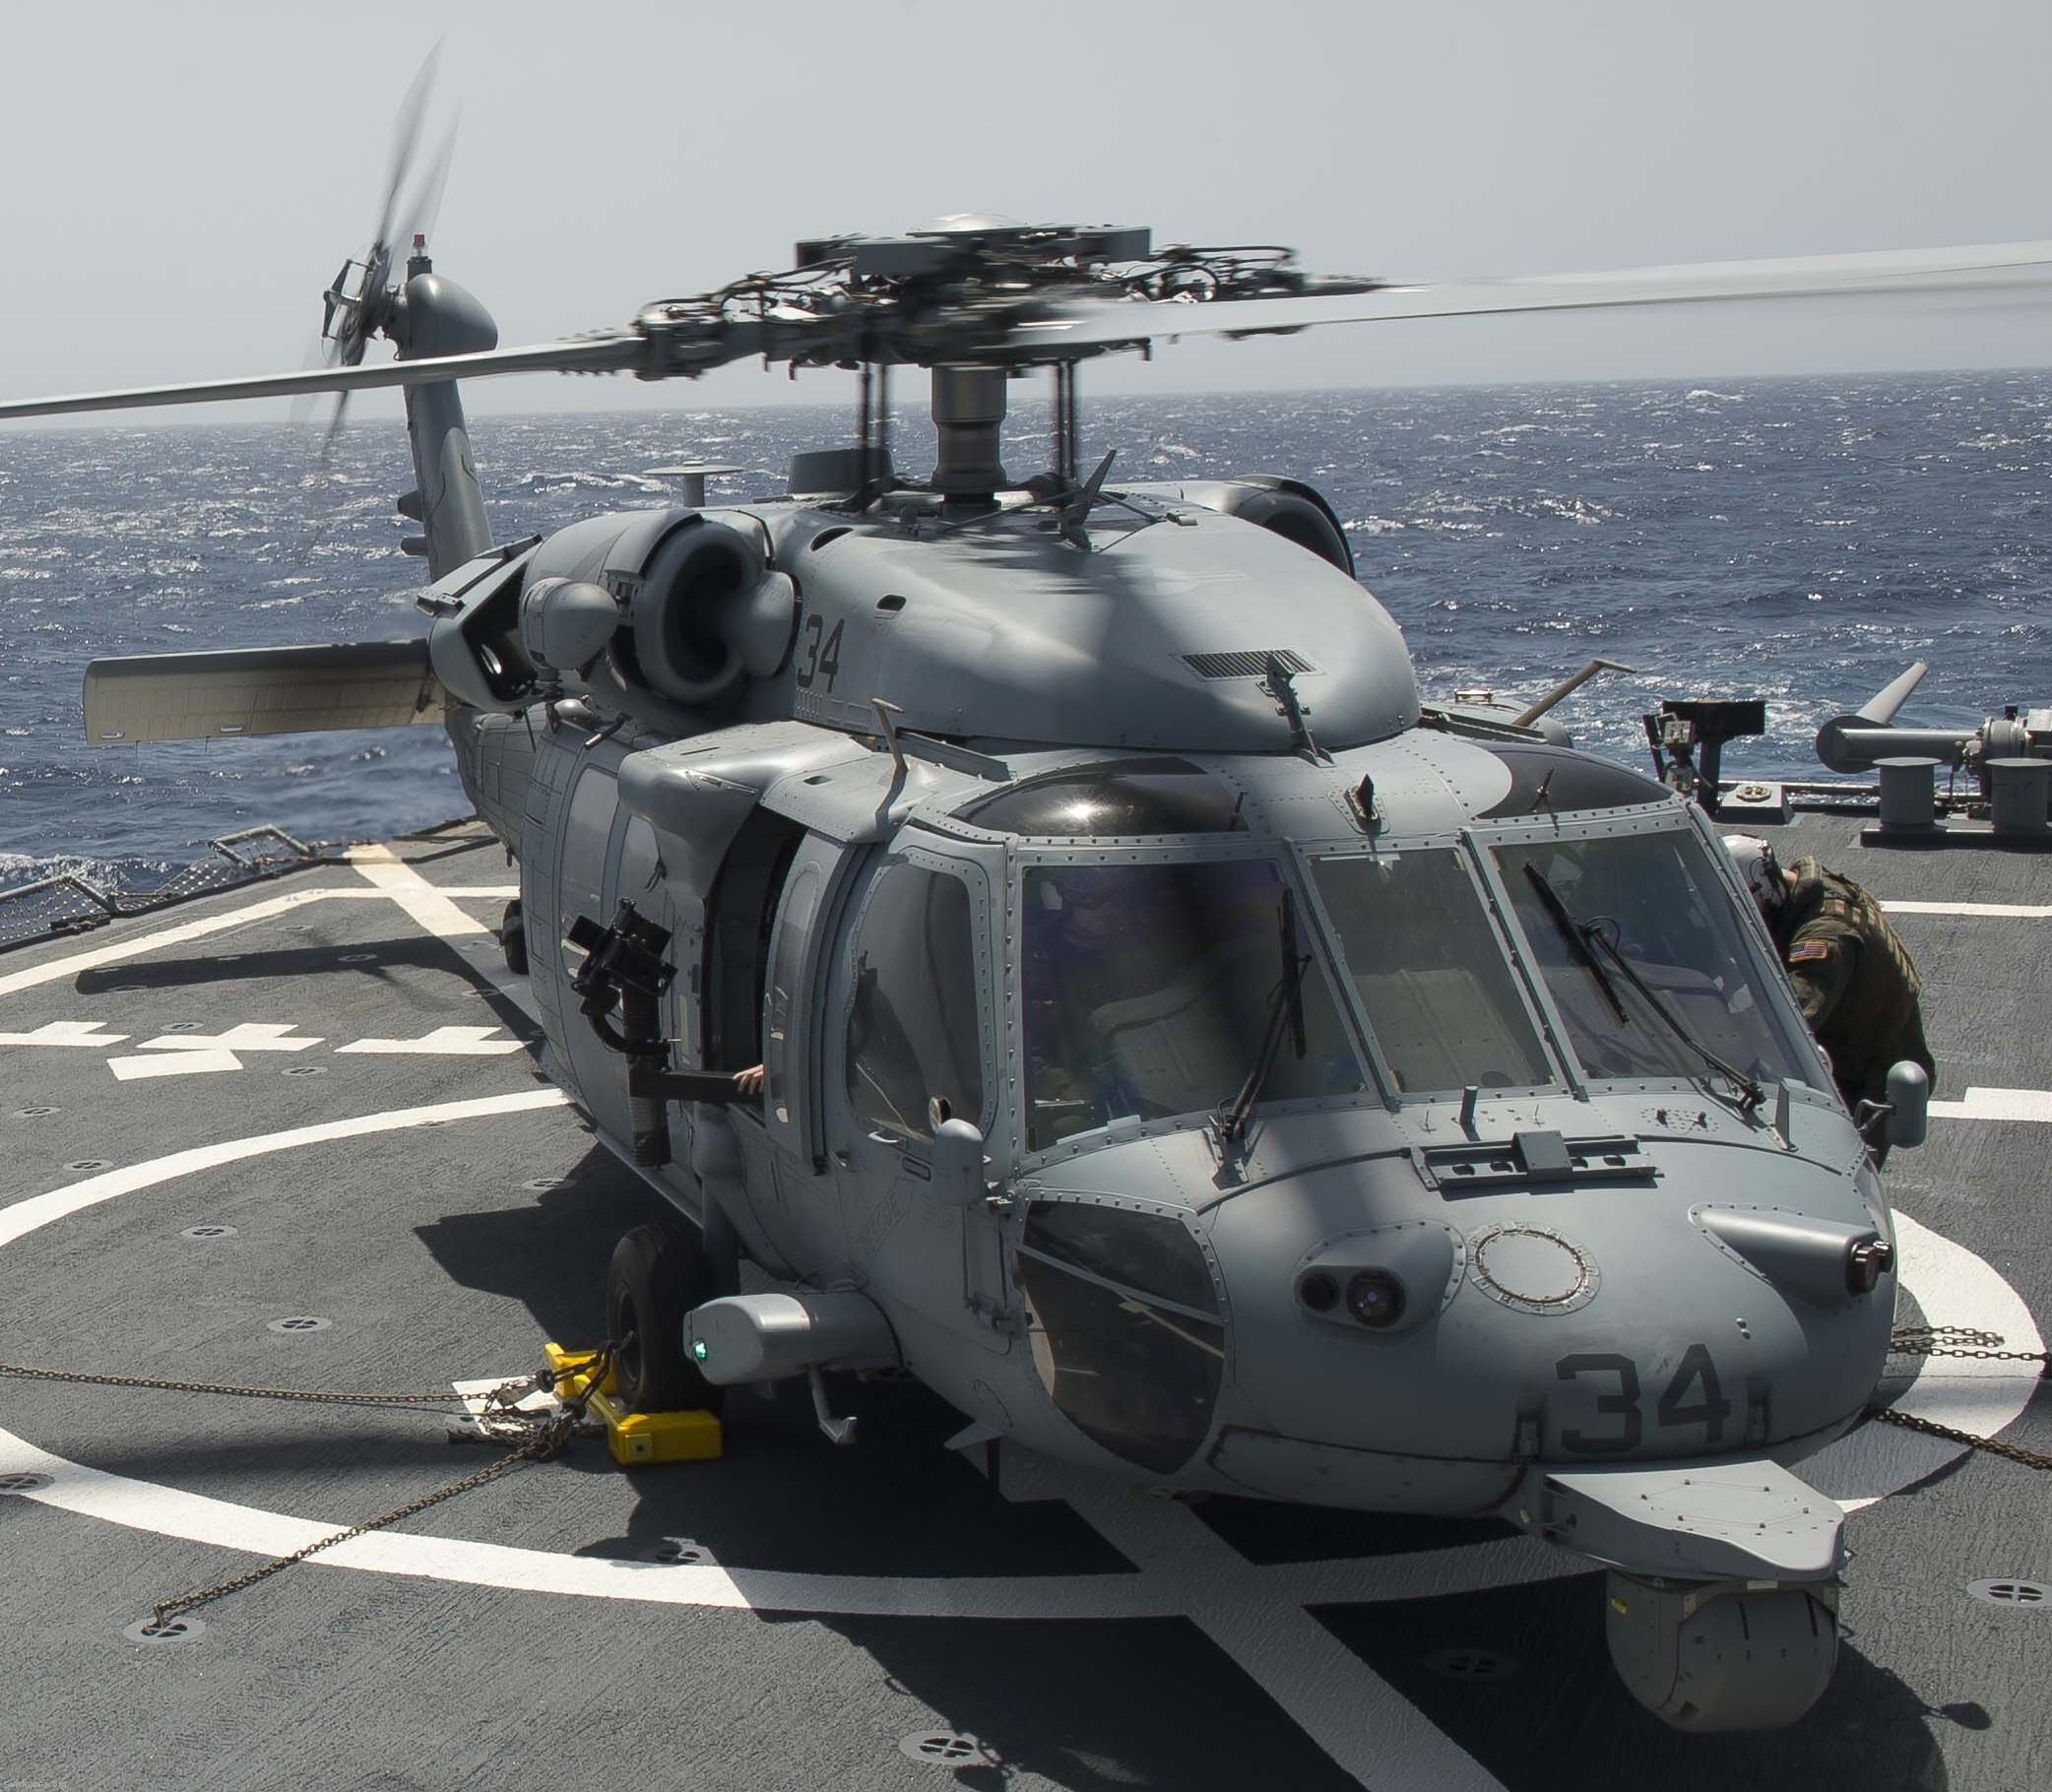 hsc-28 dragon whales helicopter sea combat squadron mh-60s seahawk us navy 69 uss porter ddg-78